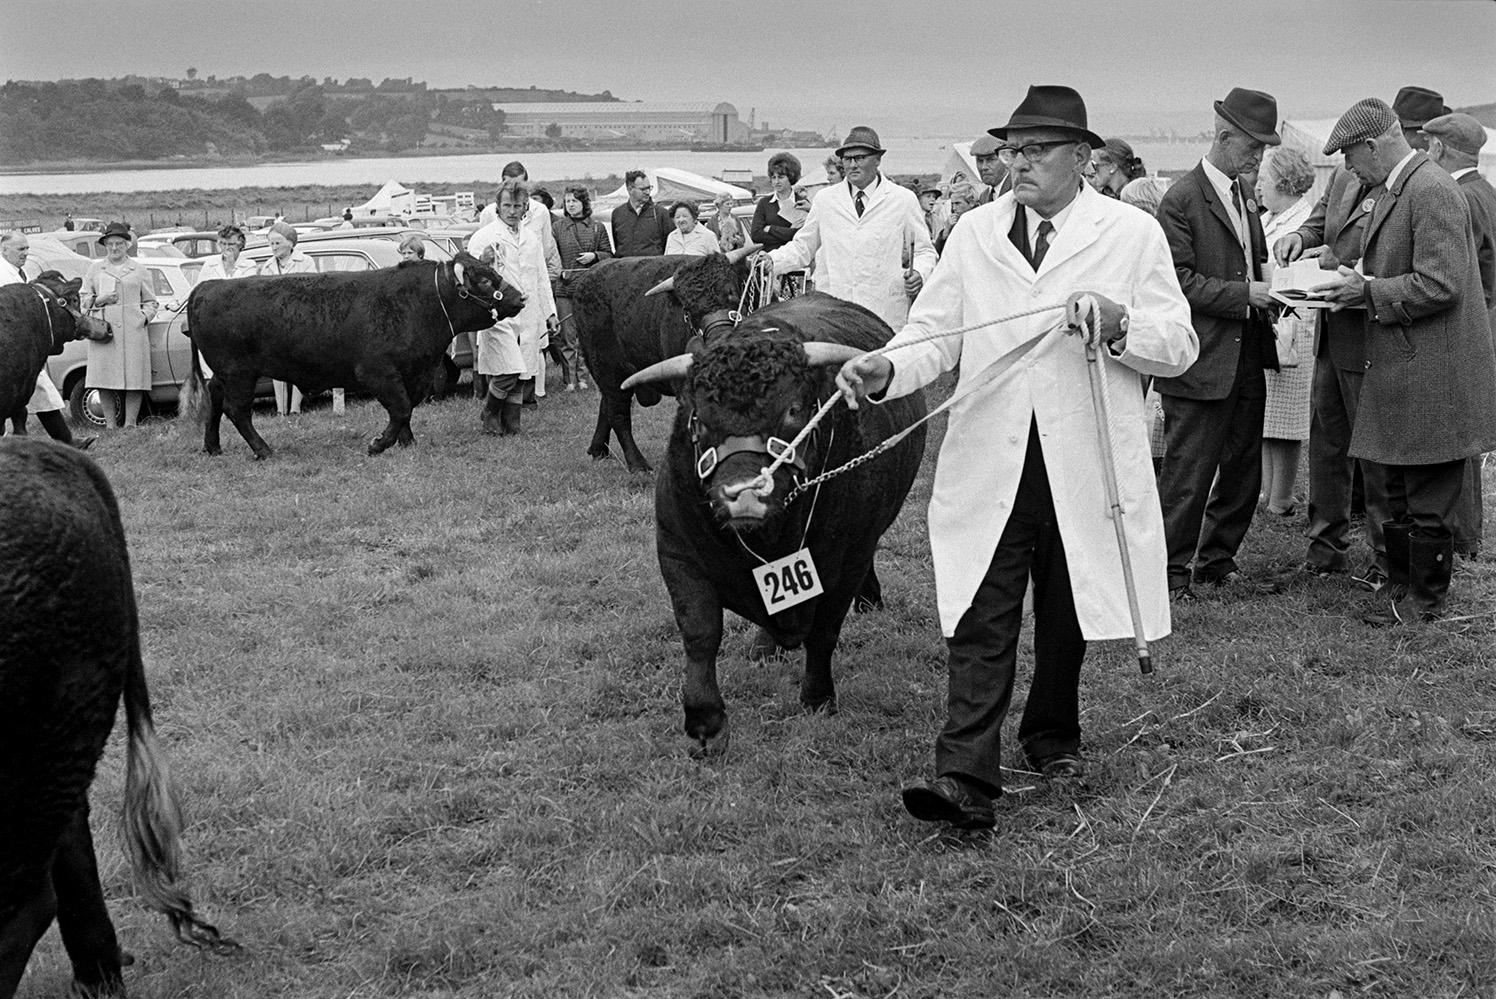 Bulls being paraded and judged at the North Devon Show at Instow. Spectators are watching the parade.